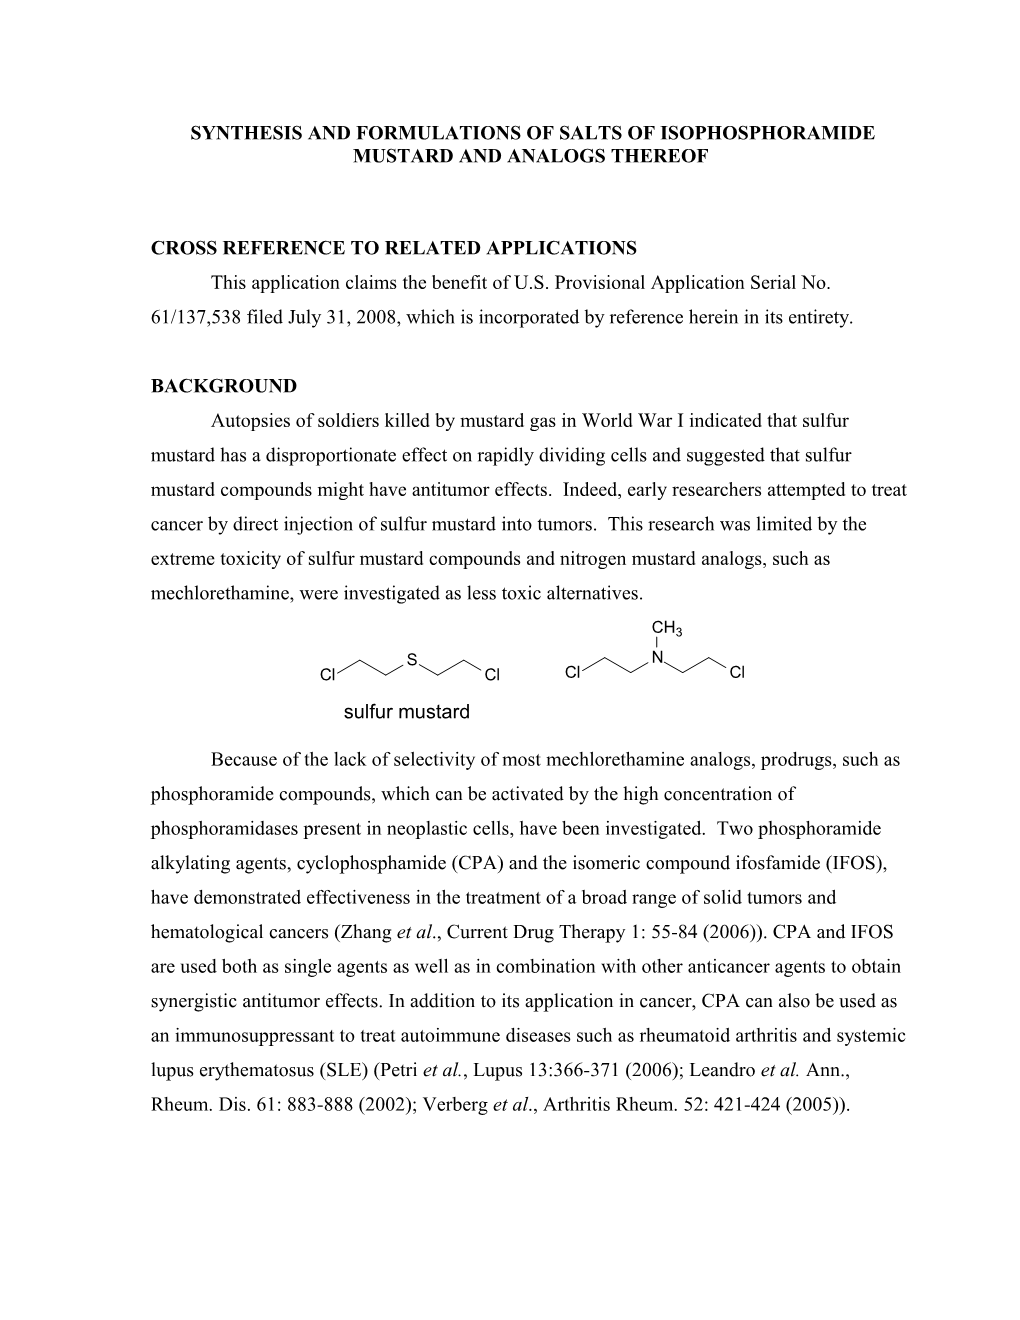 Synthesis and Formulations of Salts of Isophosphoramide Mustard and Analogs Thereof